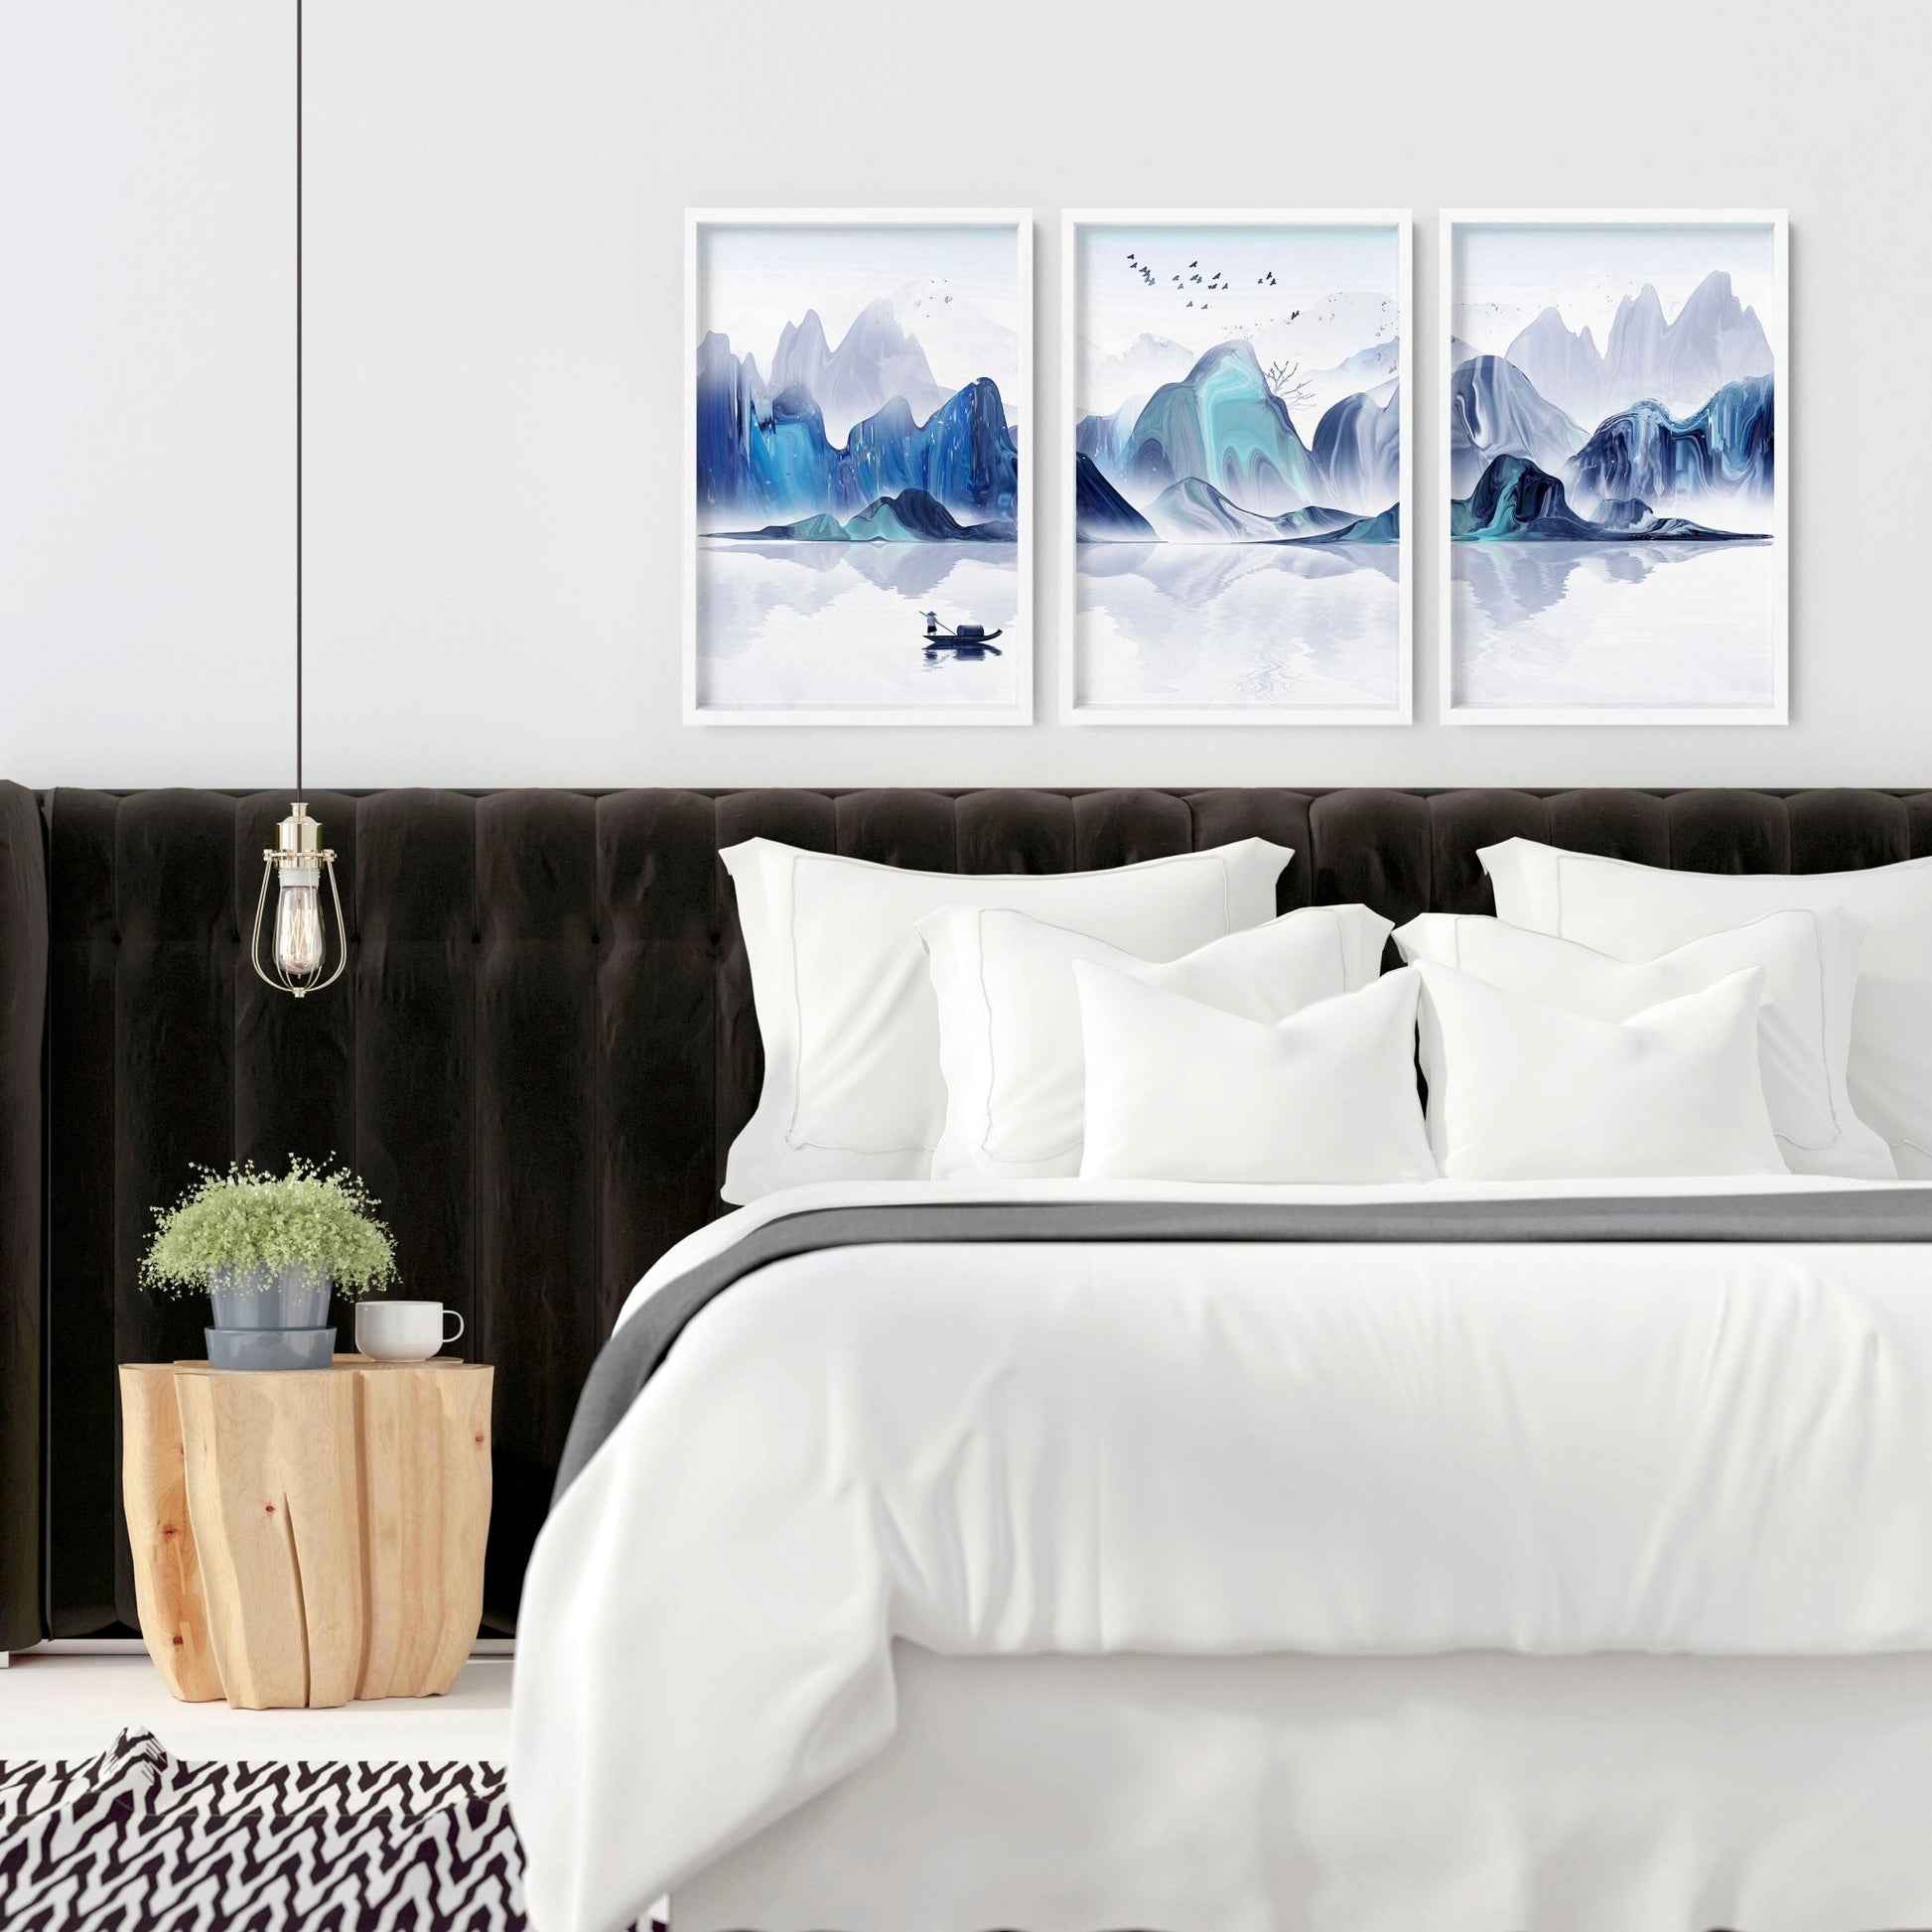 Teal Japanese wall decor for bedroom | set of 3 wall art prints - About Wall Art